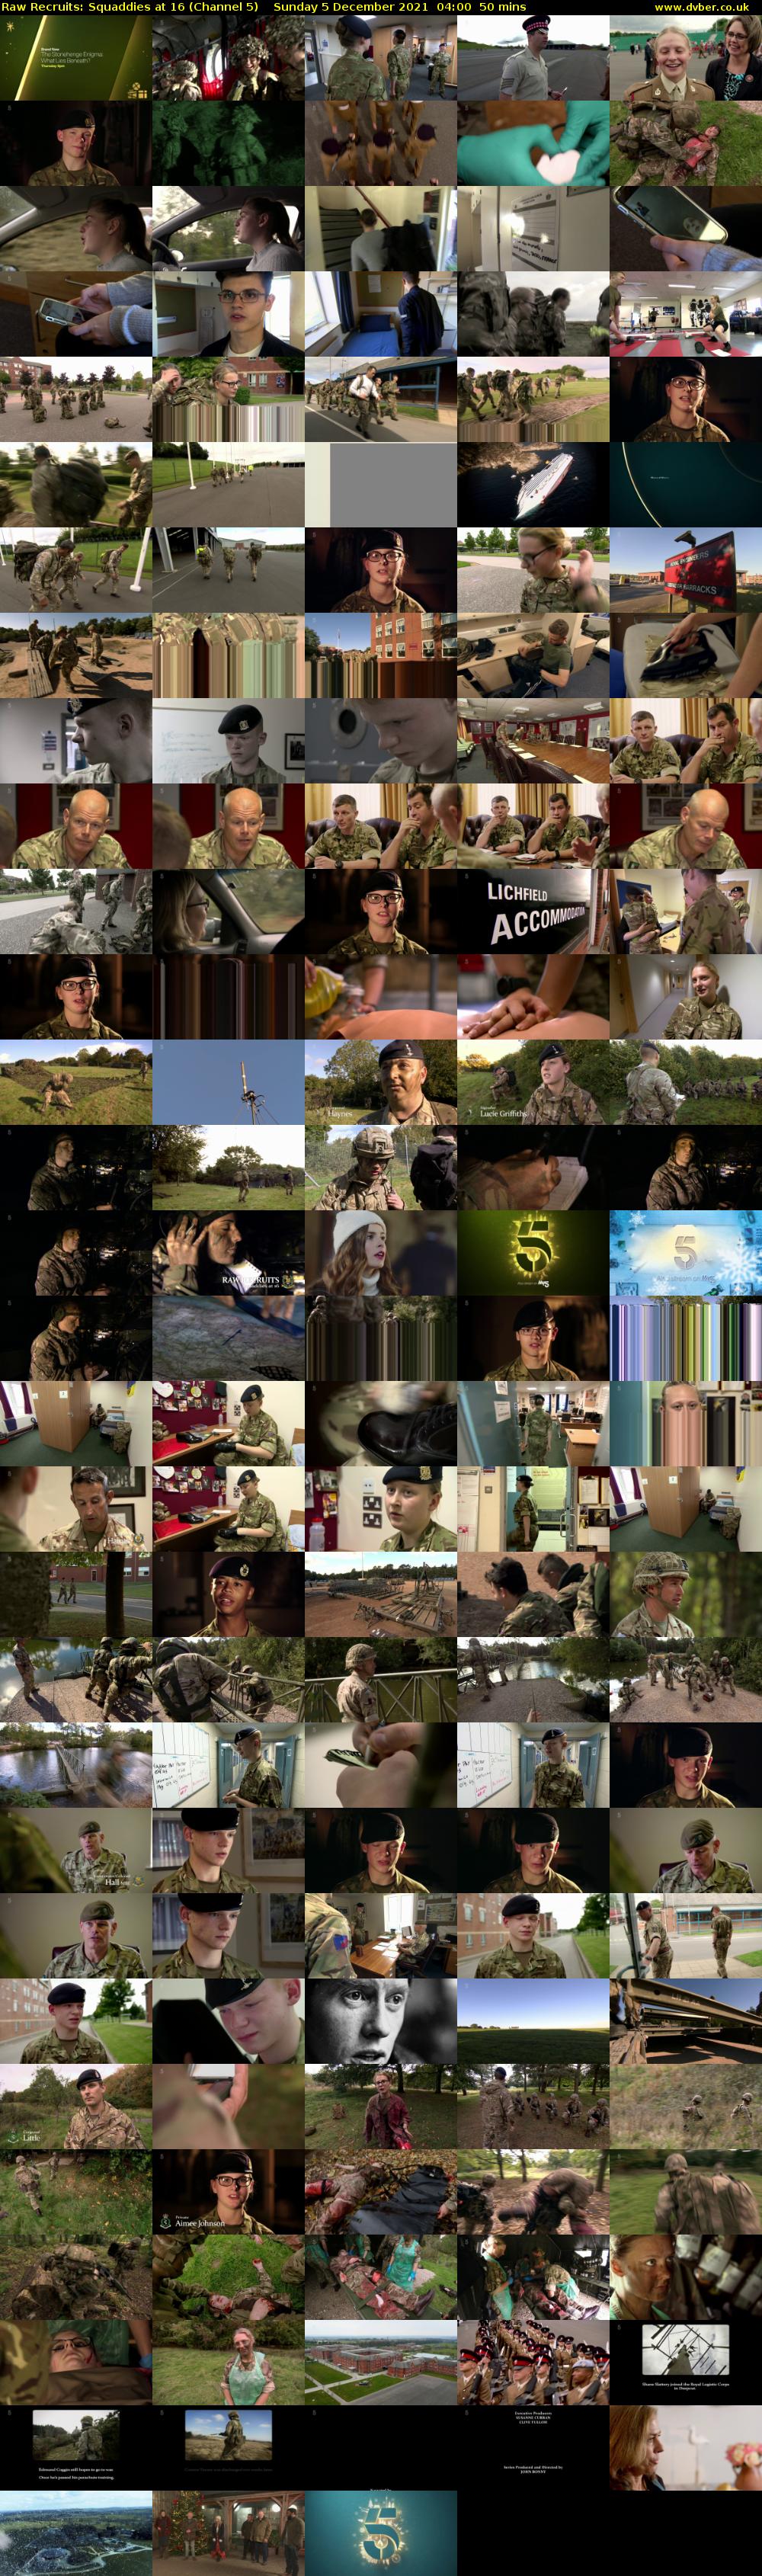 Raw Recruits: Squaddies at 16 (Channel 5) Sunday 5 December 2021 04:00 - 04:50